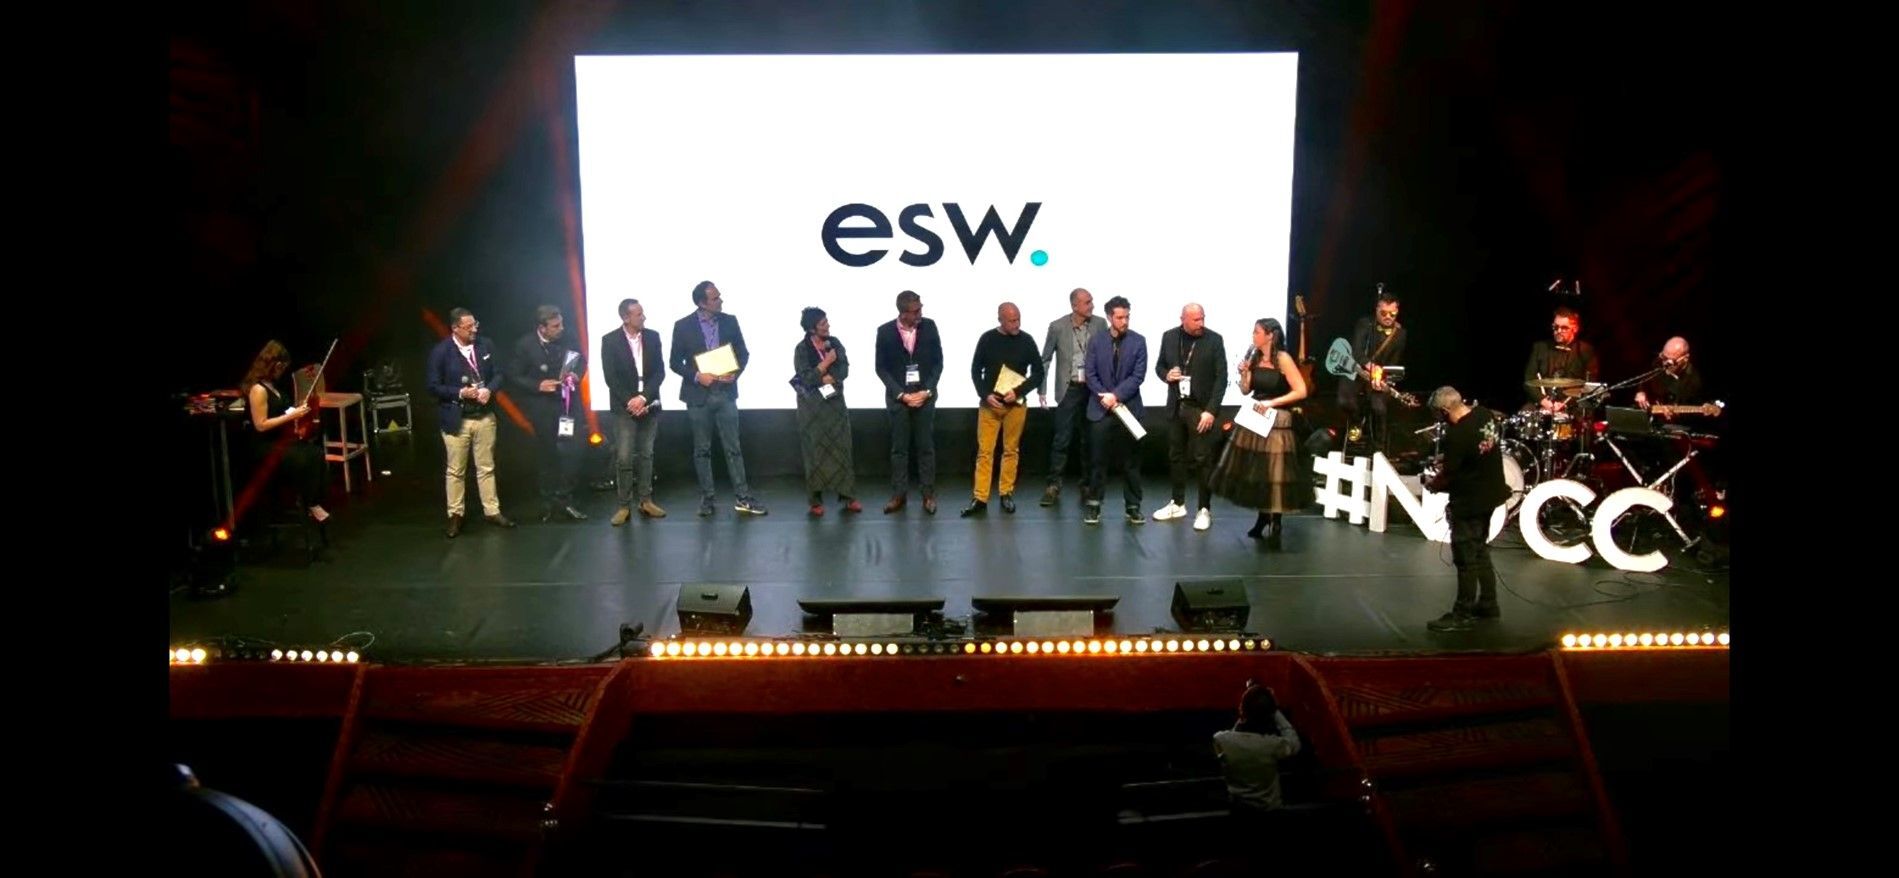 The ESW Team stands on a stage accepting the nuit-du-commerce-connecte award